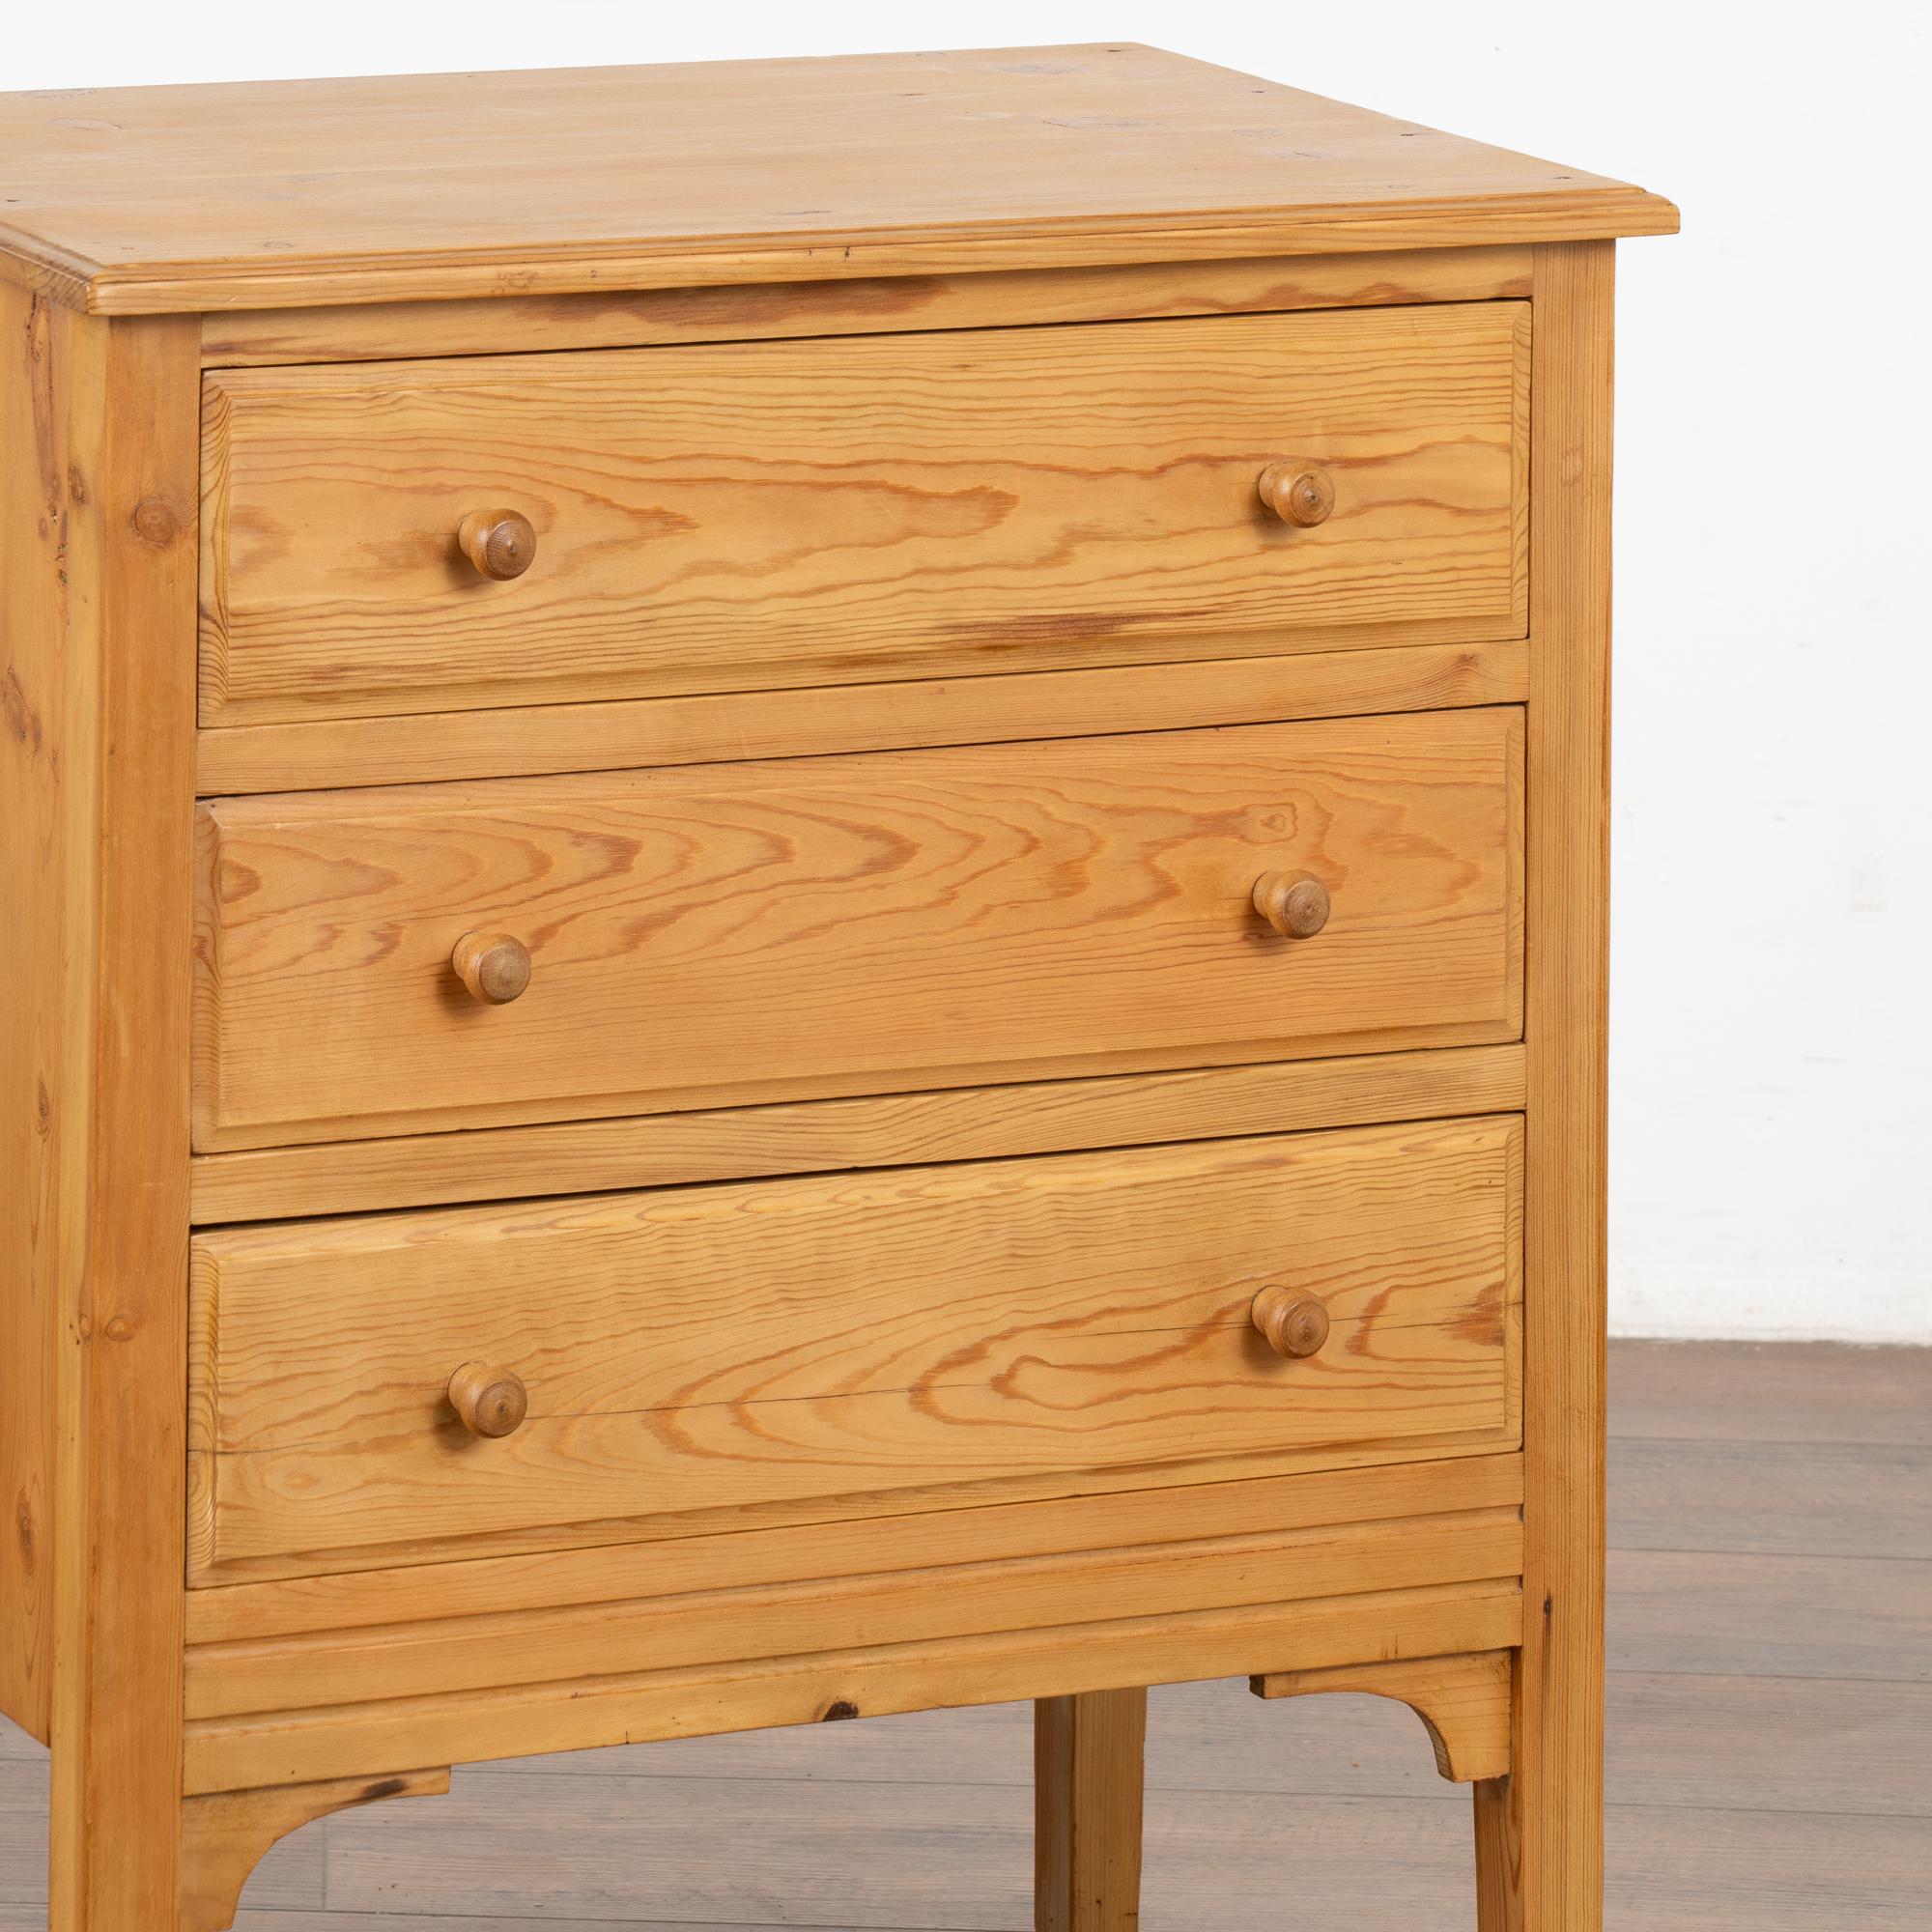 Vintage Pine Small Chest of Drawers Nightstand, Denmark circa 1940 For Sale 1